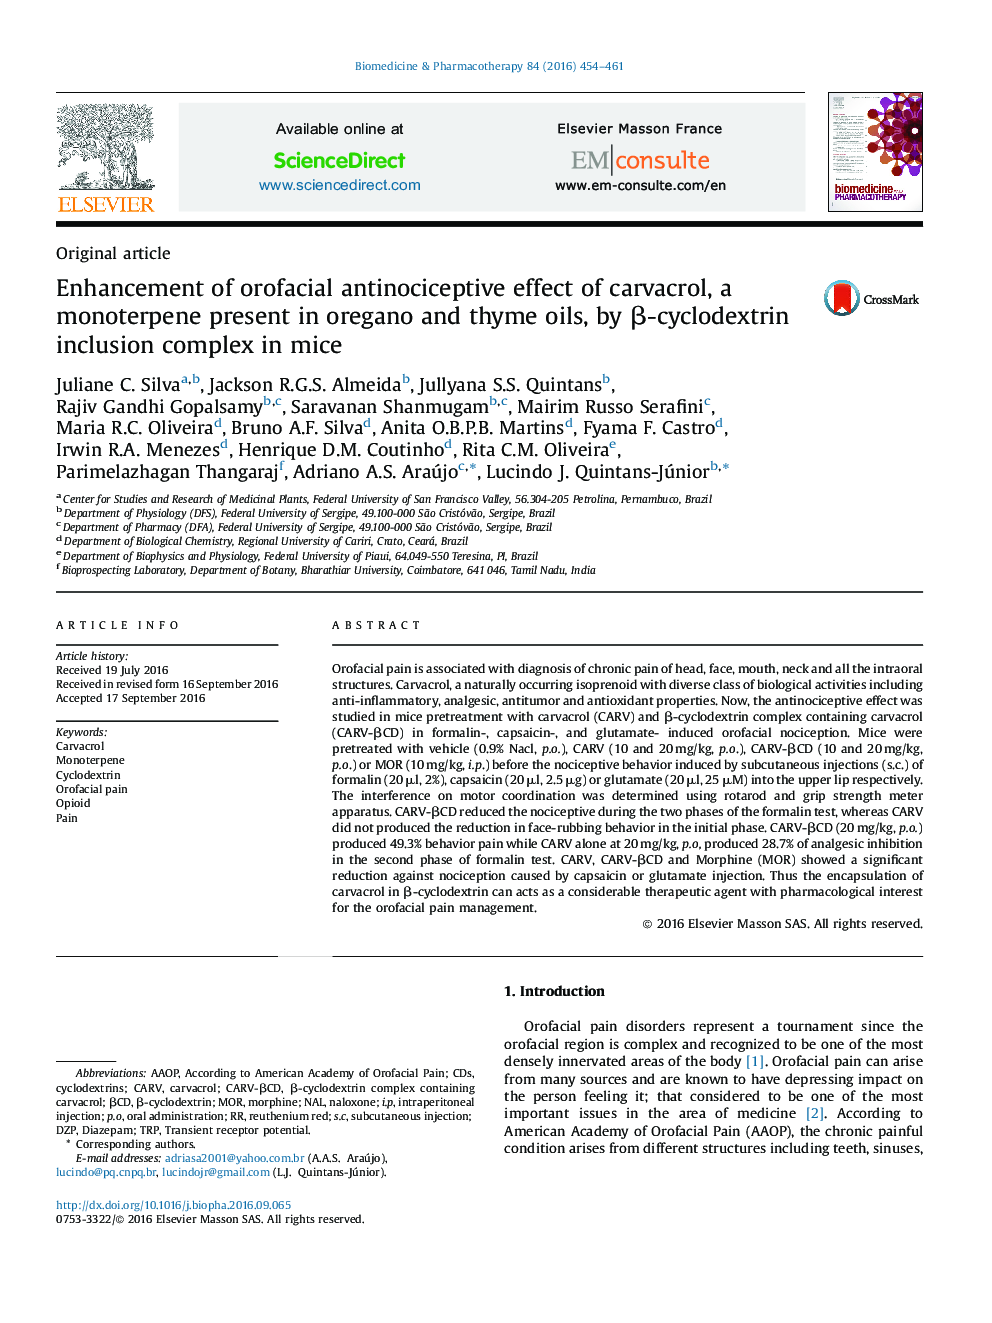 Enhancement of orofacial antinociceptive effect of carvacrol, a monoterpene present in oregano and thyme oils, by Î²-cyclodextrin inclusion complex in mice